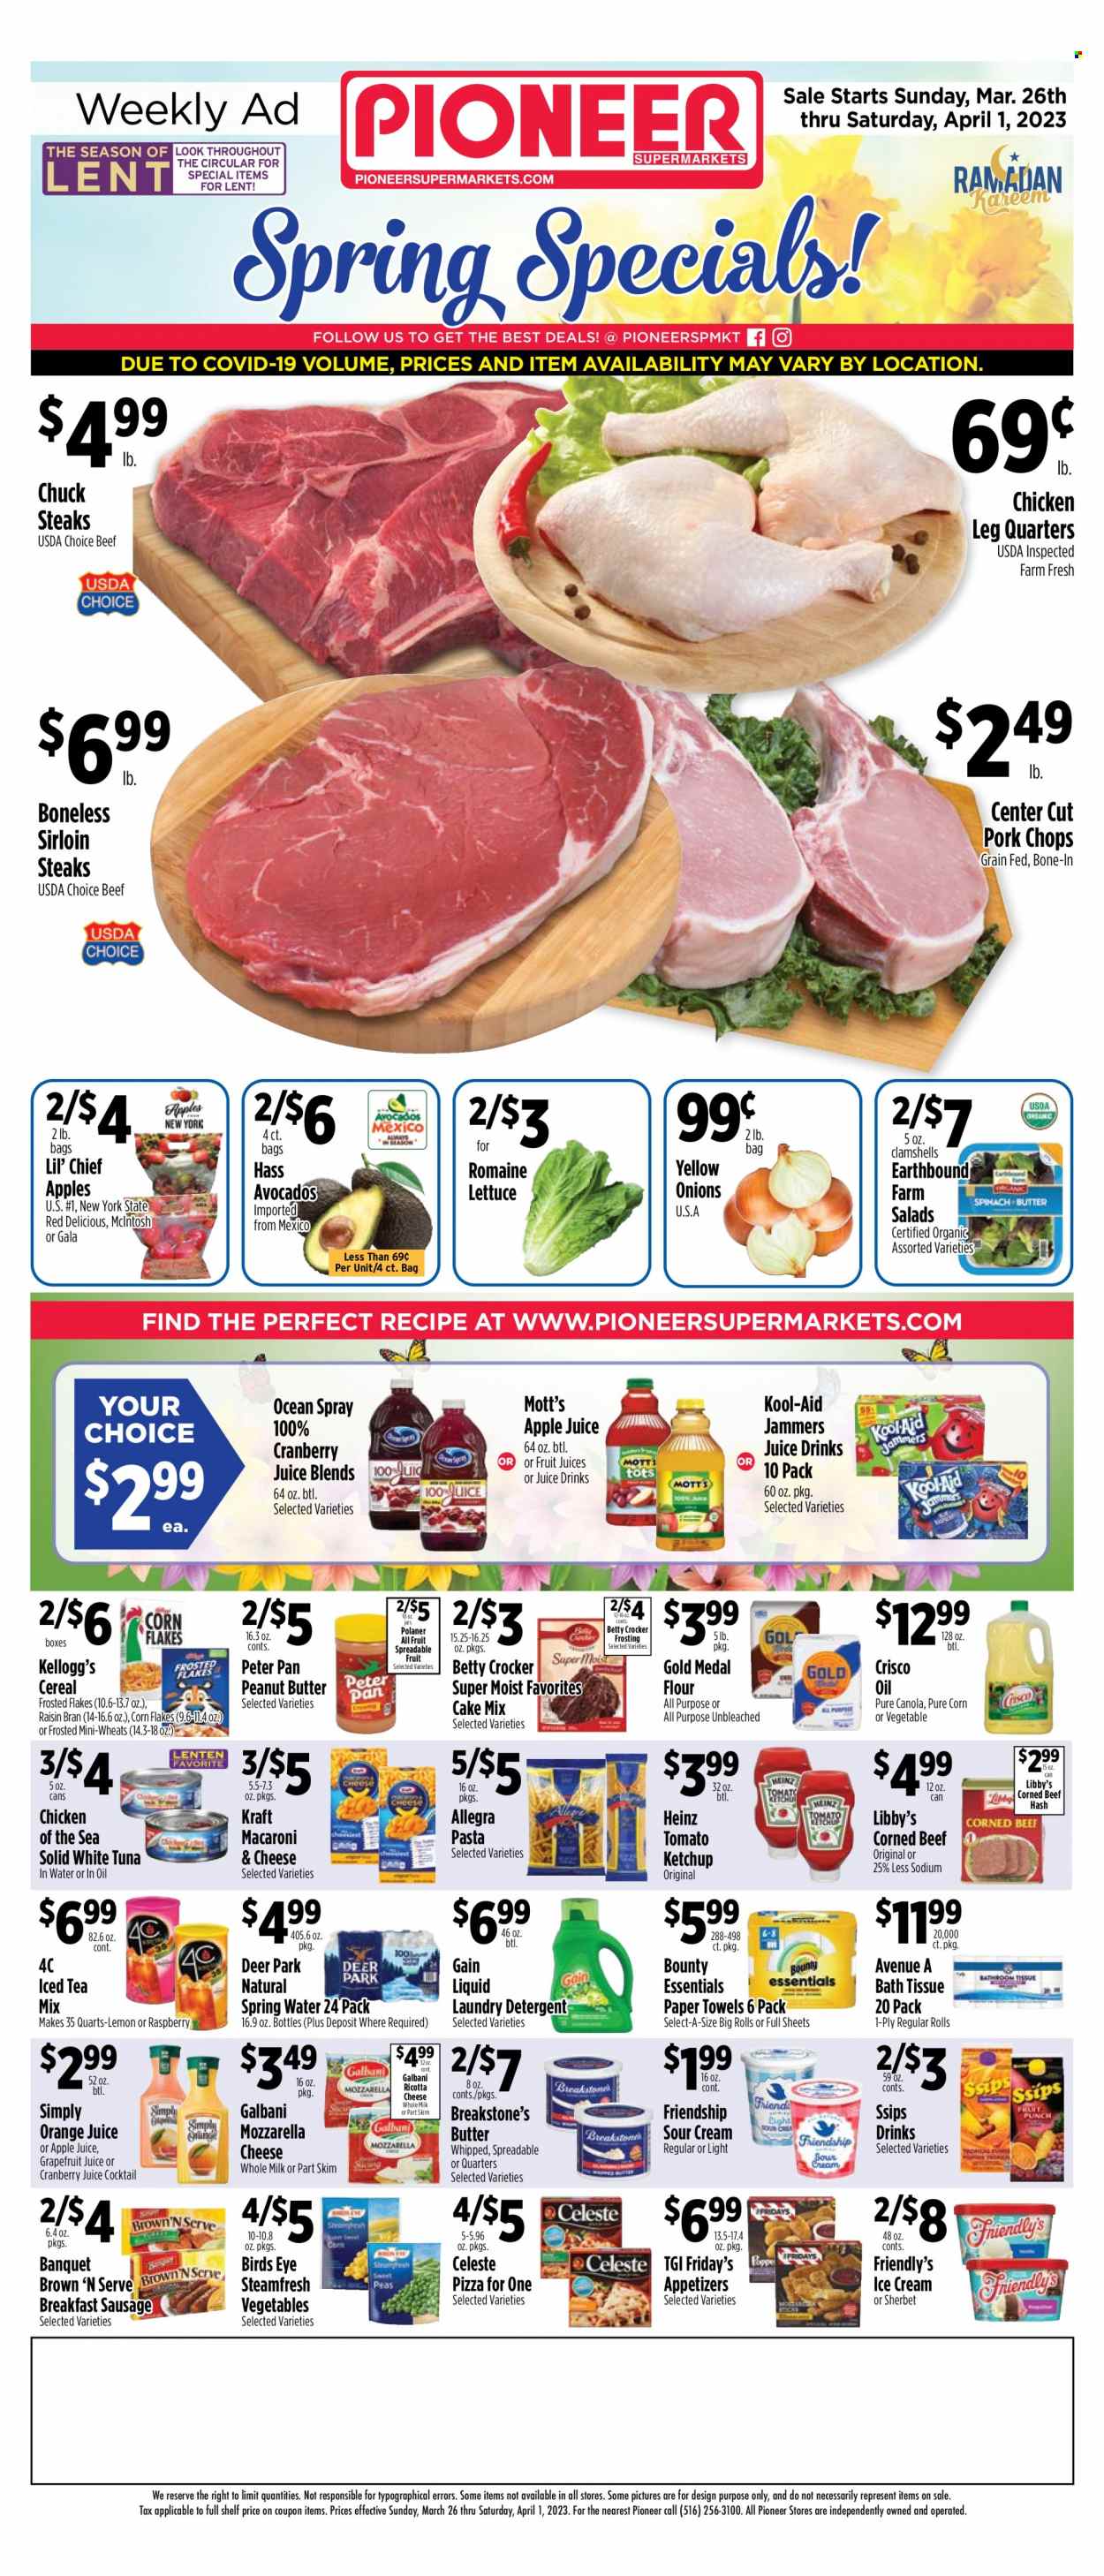 thumbnail - Pioneer Supermarkets Flyer - 03/26/2023 - 04/01/2023 - Sales products - cake mix, onion, avocado, Gala, Red Delicious apples, Mott's, tuna, beef hash, macaroni & cheese, pizza, pasta, Bird's Eye, Kraft®, sausage, Brown 'N Serve, corned beef, ricotta, Galbani, milk, sour cream, ice cream, sherbet, Friendly's Ice Cream, Celeste, Bounty, Kellogg's, Crisco, flour, frosting, Heinz, Chicken of the Sea, cereals, corn flakes, Frosted Flakes, Raisin Bran, ketchup, peanut butter, apple juice, cranberry juice, orange juice, juice, ice tea, spring water, water, red wine, wine, chicken legs, beef meat, steak, sirloin steak, pork chops, pork meat, bath tissue, kitchen towels, paper towels, detergent, Gain, laundry detergent. Page 1.